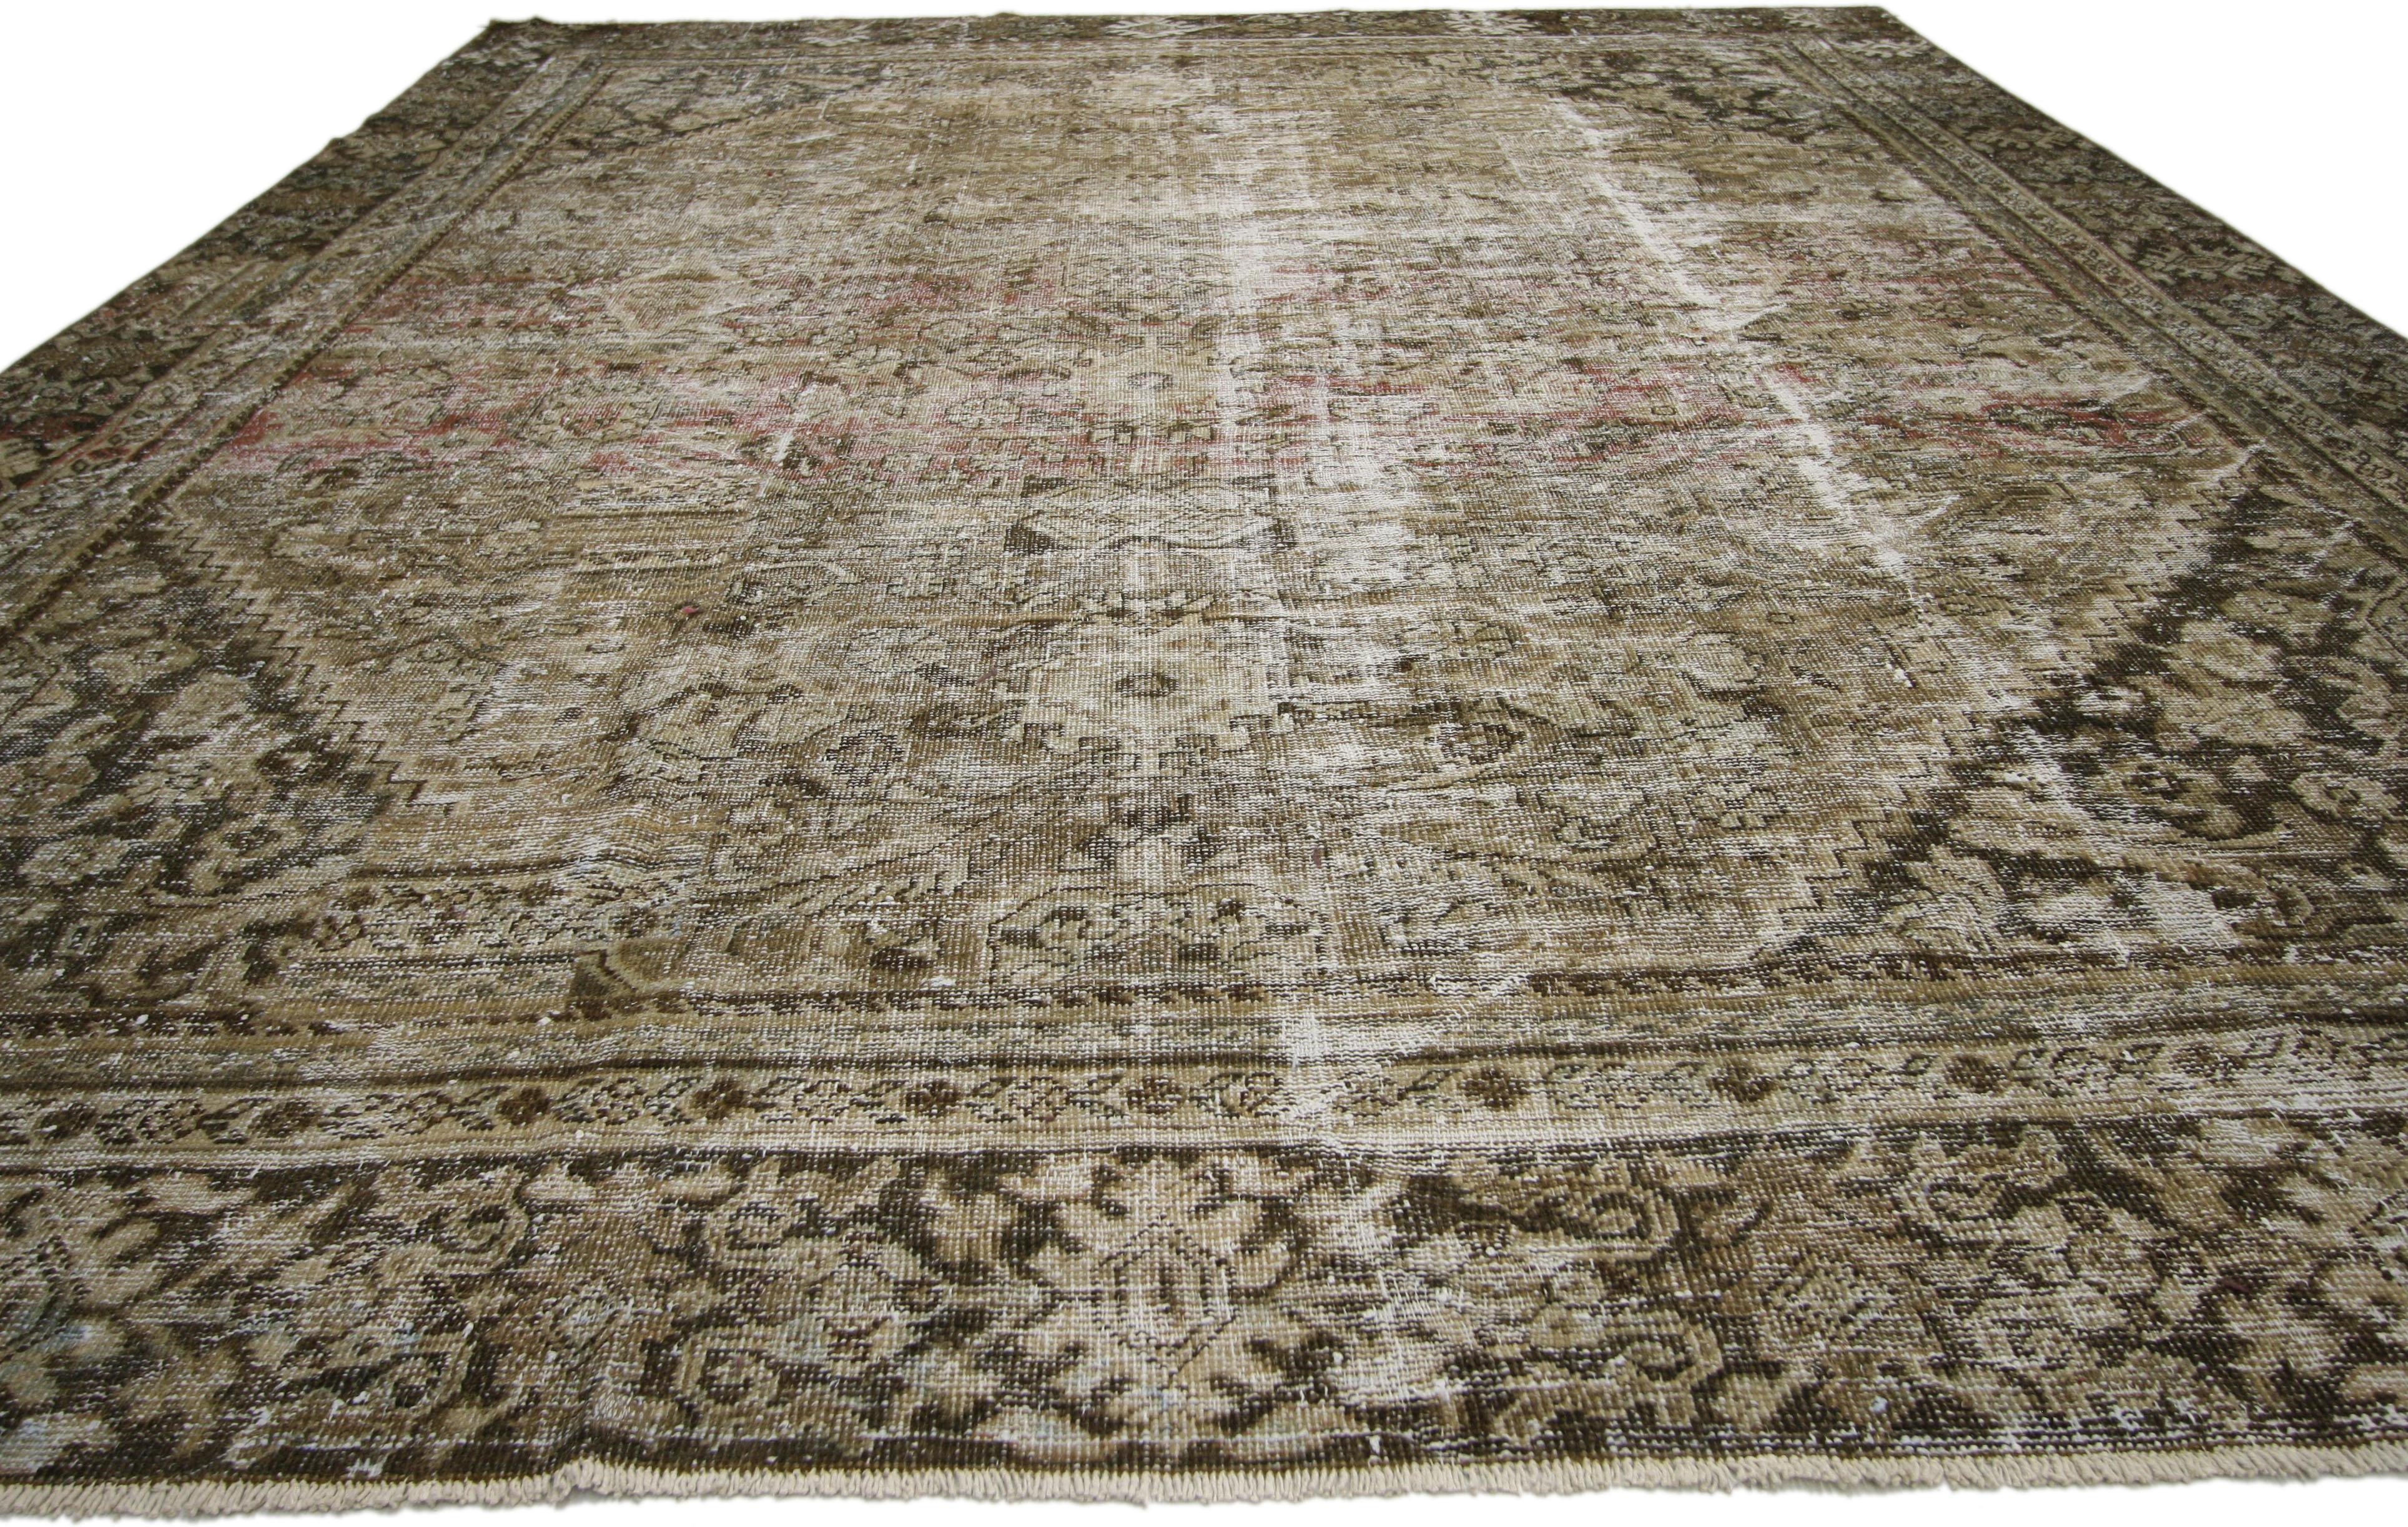 Hand-Knotted Distressed Antique Persian Mahal Rug with Modern Urban Industrial Style